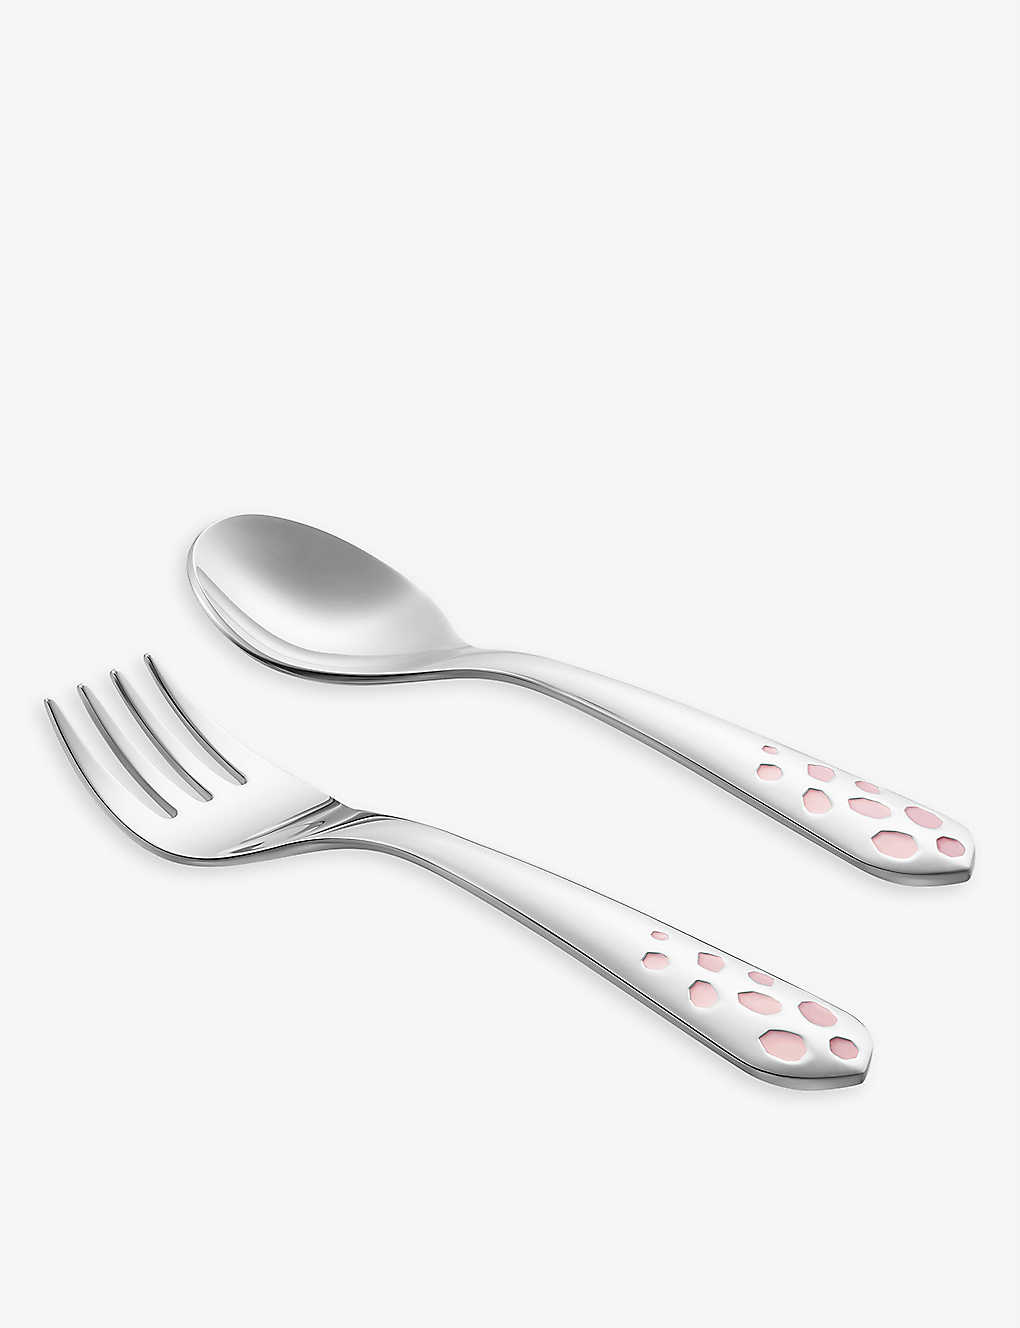 Cartier Silver Lacquered Metal Two-piece Cutlery Set